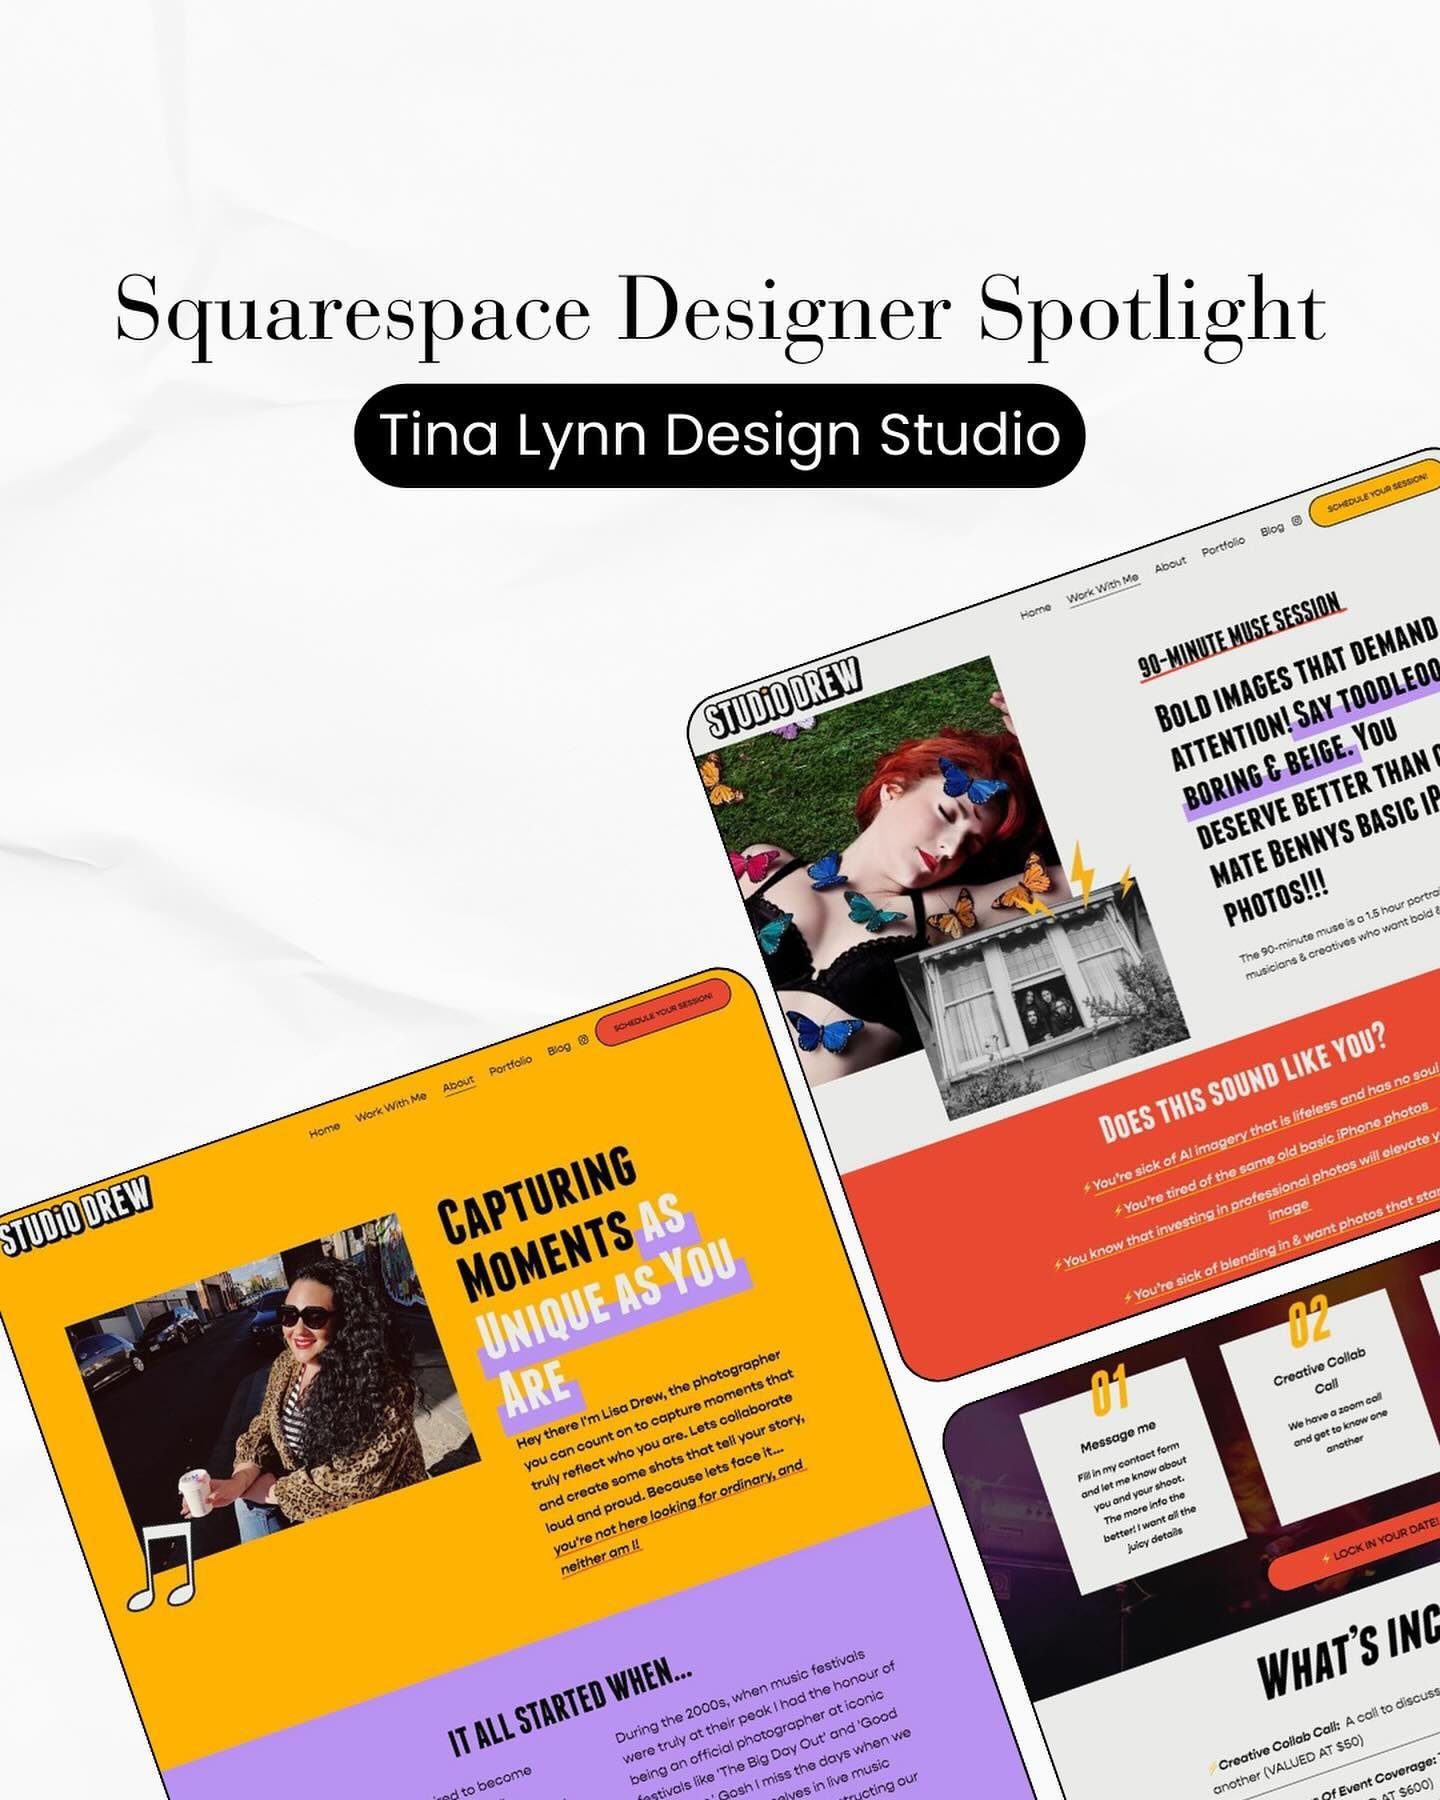 Introducing Tina Lynn Design Studio, our featured Squarespace Designer!

Tina excels in creating bespoke websites for small businesses, tailoring each one to reflect the individuality of the brand. With over ten years of experience in web design and 